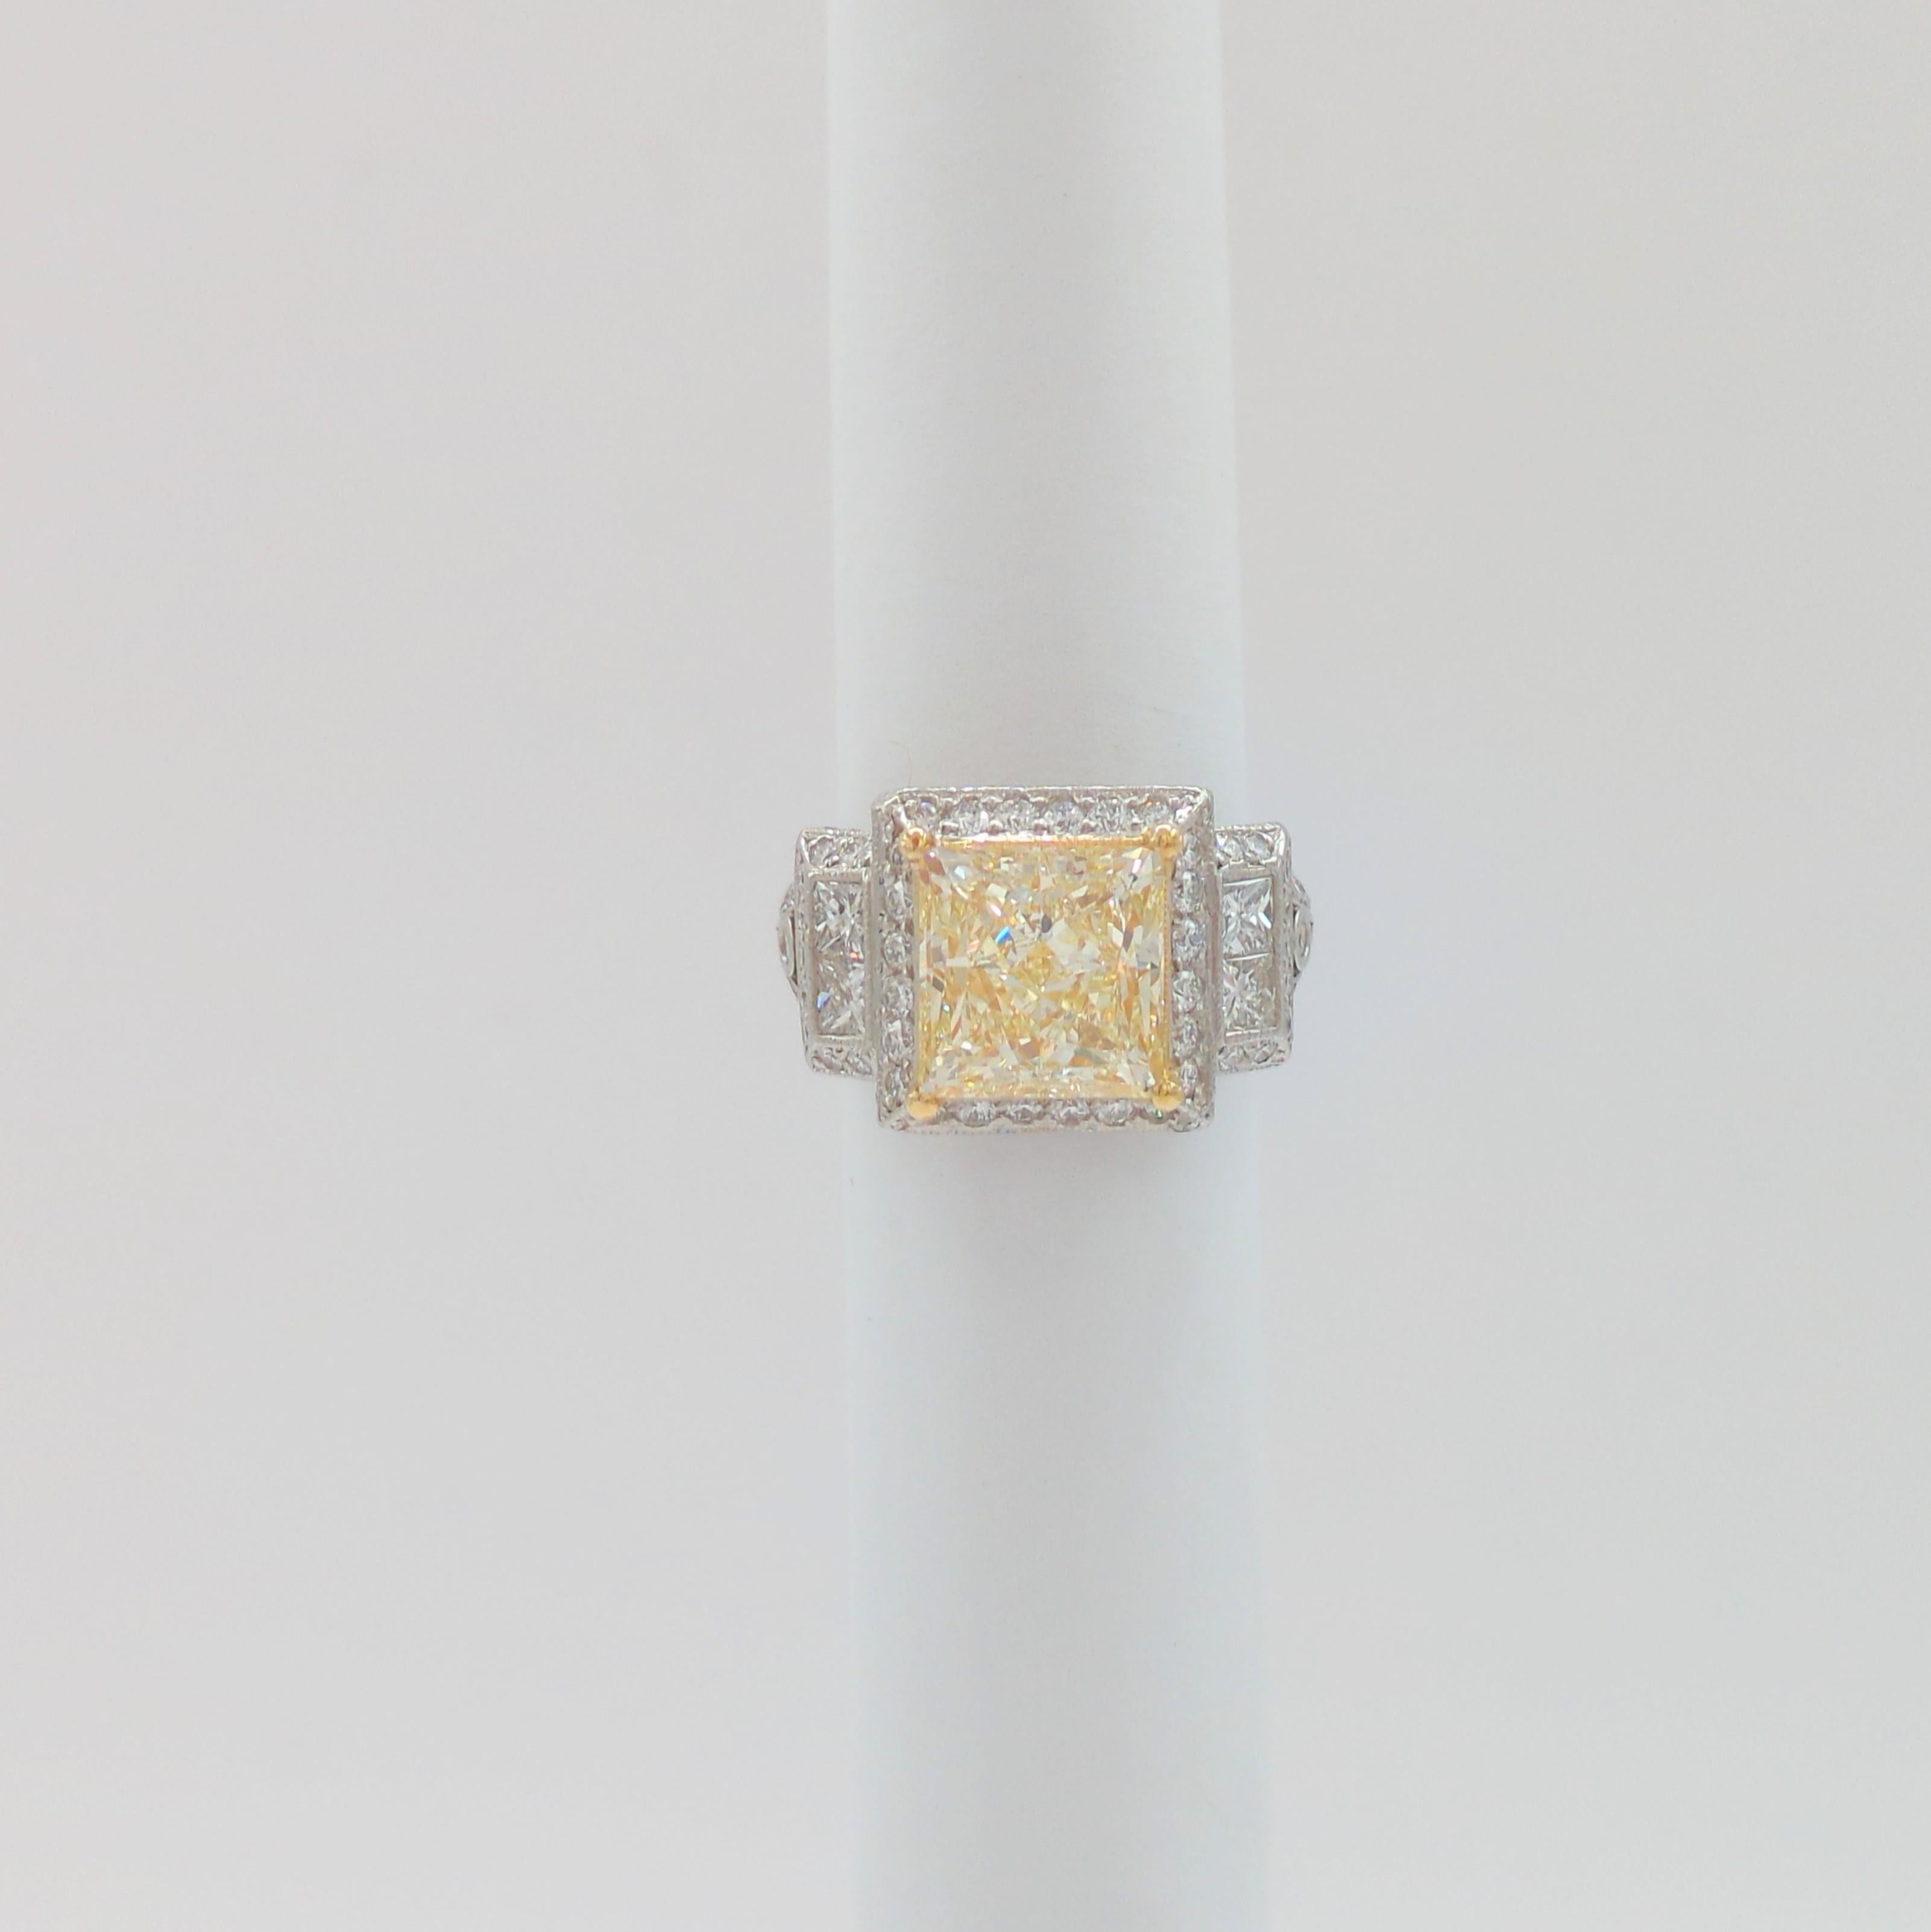 5 Carat Natural Yellow Diamond and White Diamond Ring in 14K 2Tone Gold For Sale 2